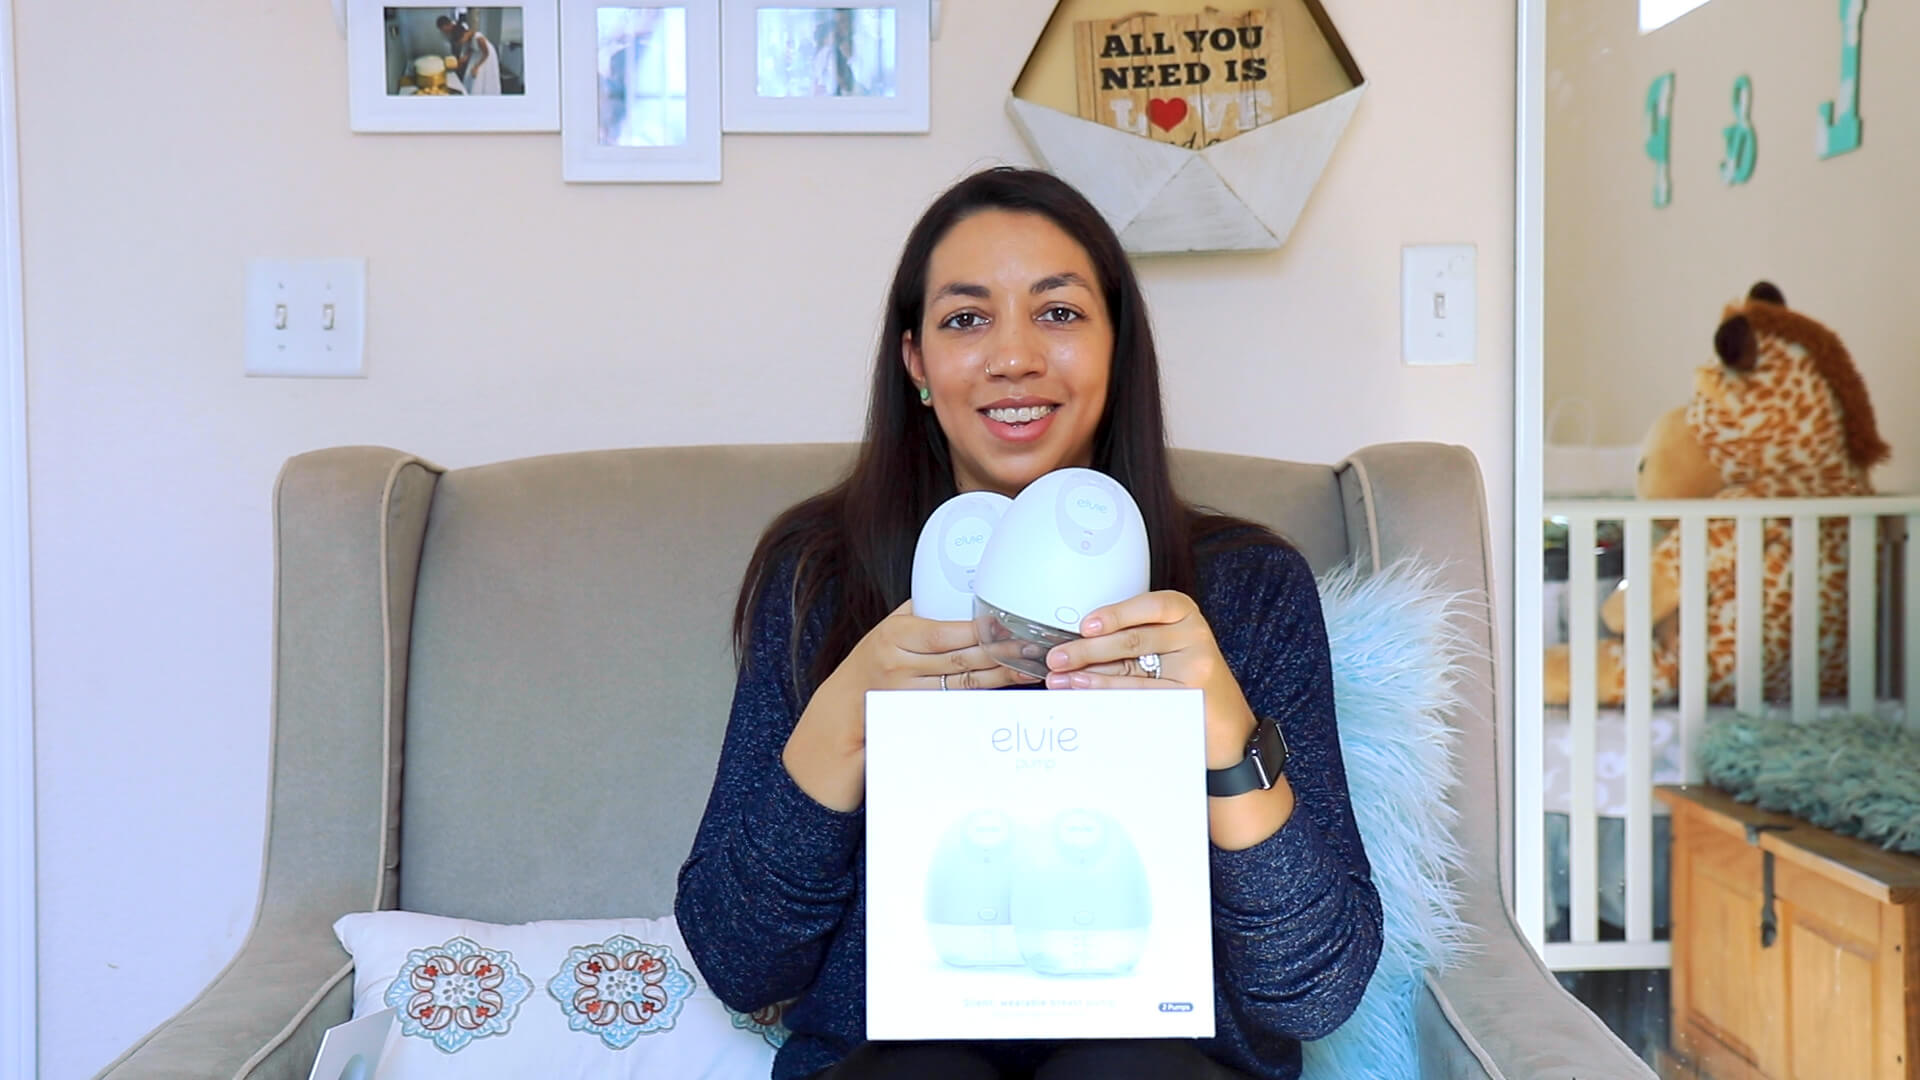 Elvie vs. Willow Breast Pump Review: Which Hands-Free Wearable